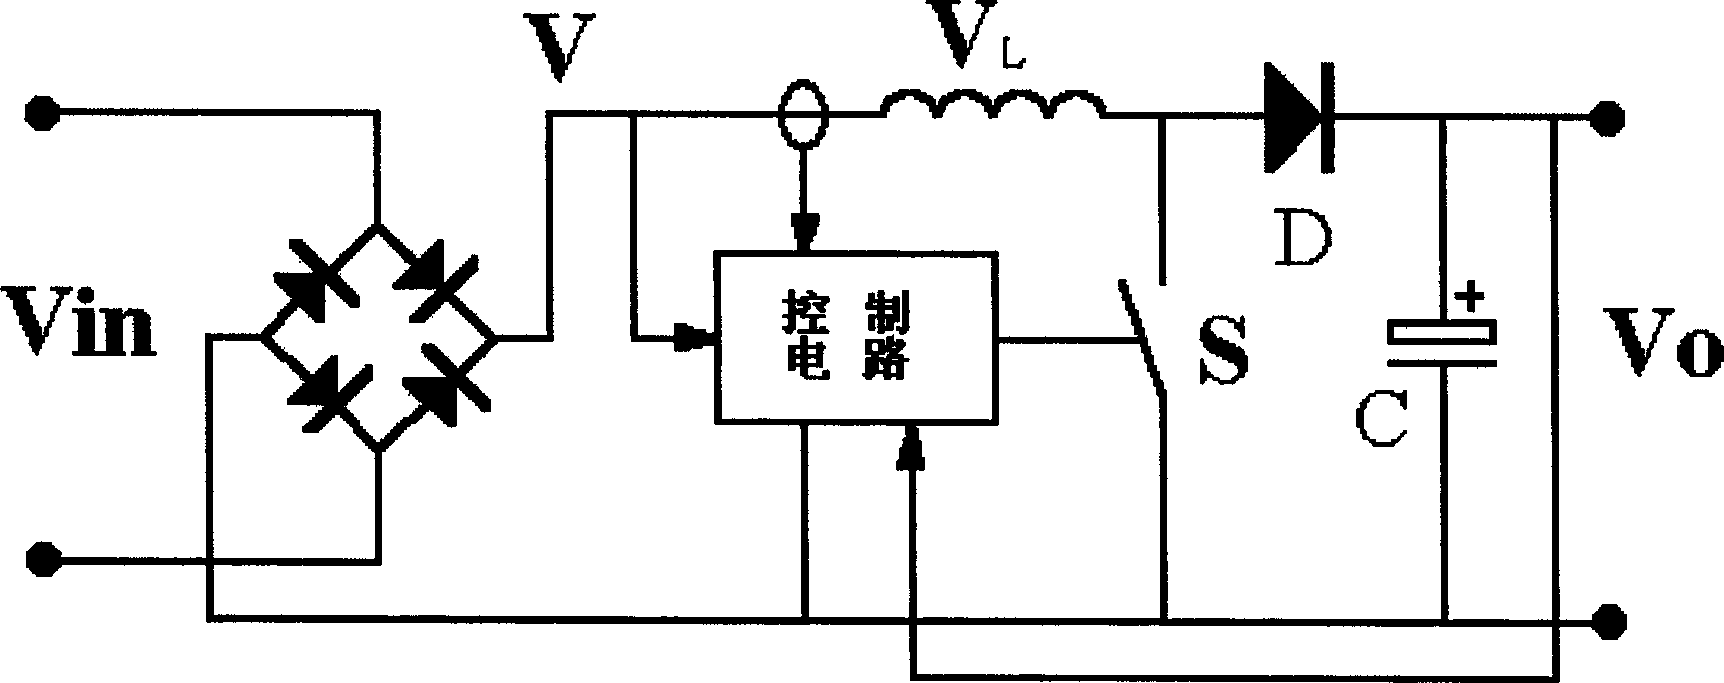 Three-phase power factor correcting circuit with AC boosting mode